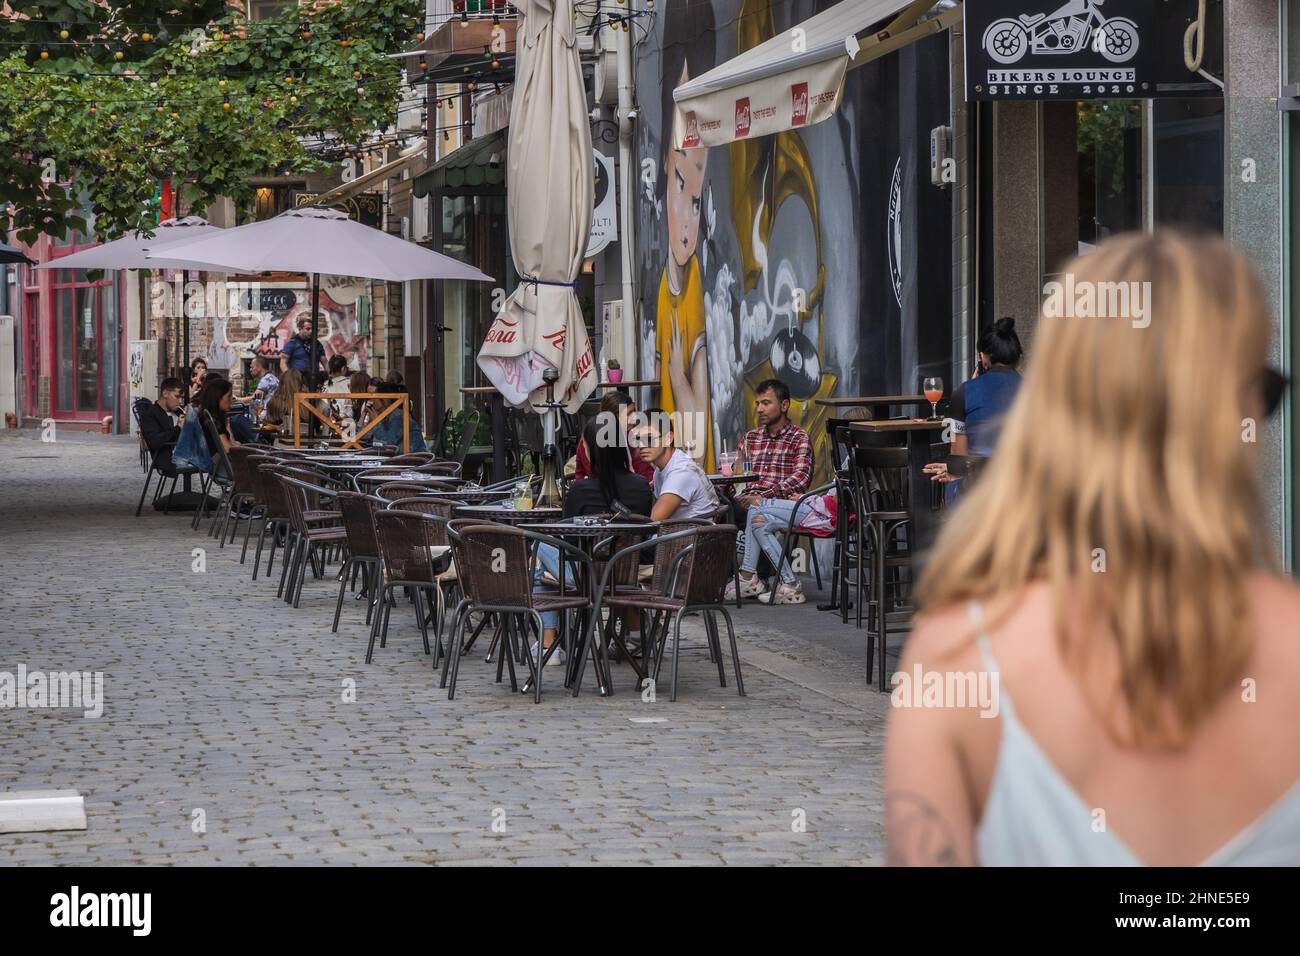 Bikers Lounge 2020 bar in Kapana - The Trap famous art quarter of Plovdiv city, capital of Plovdiv Province in south-central Bulgaria Stock Photo